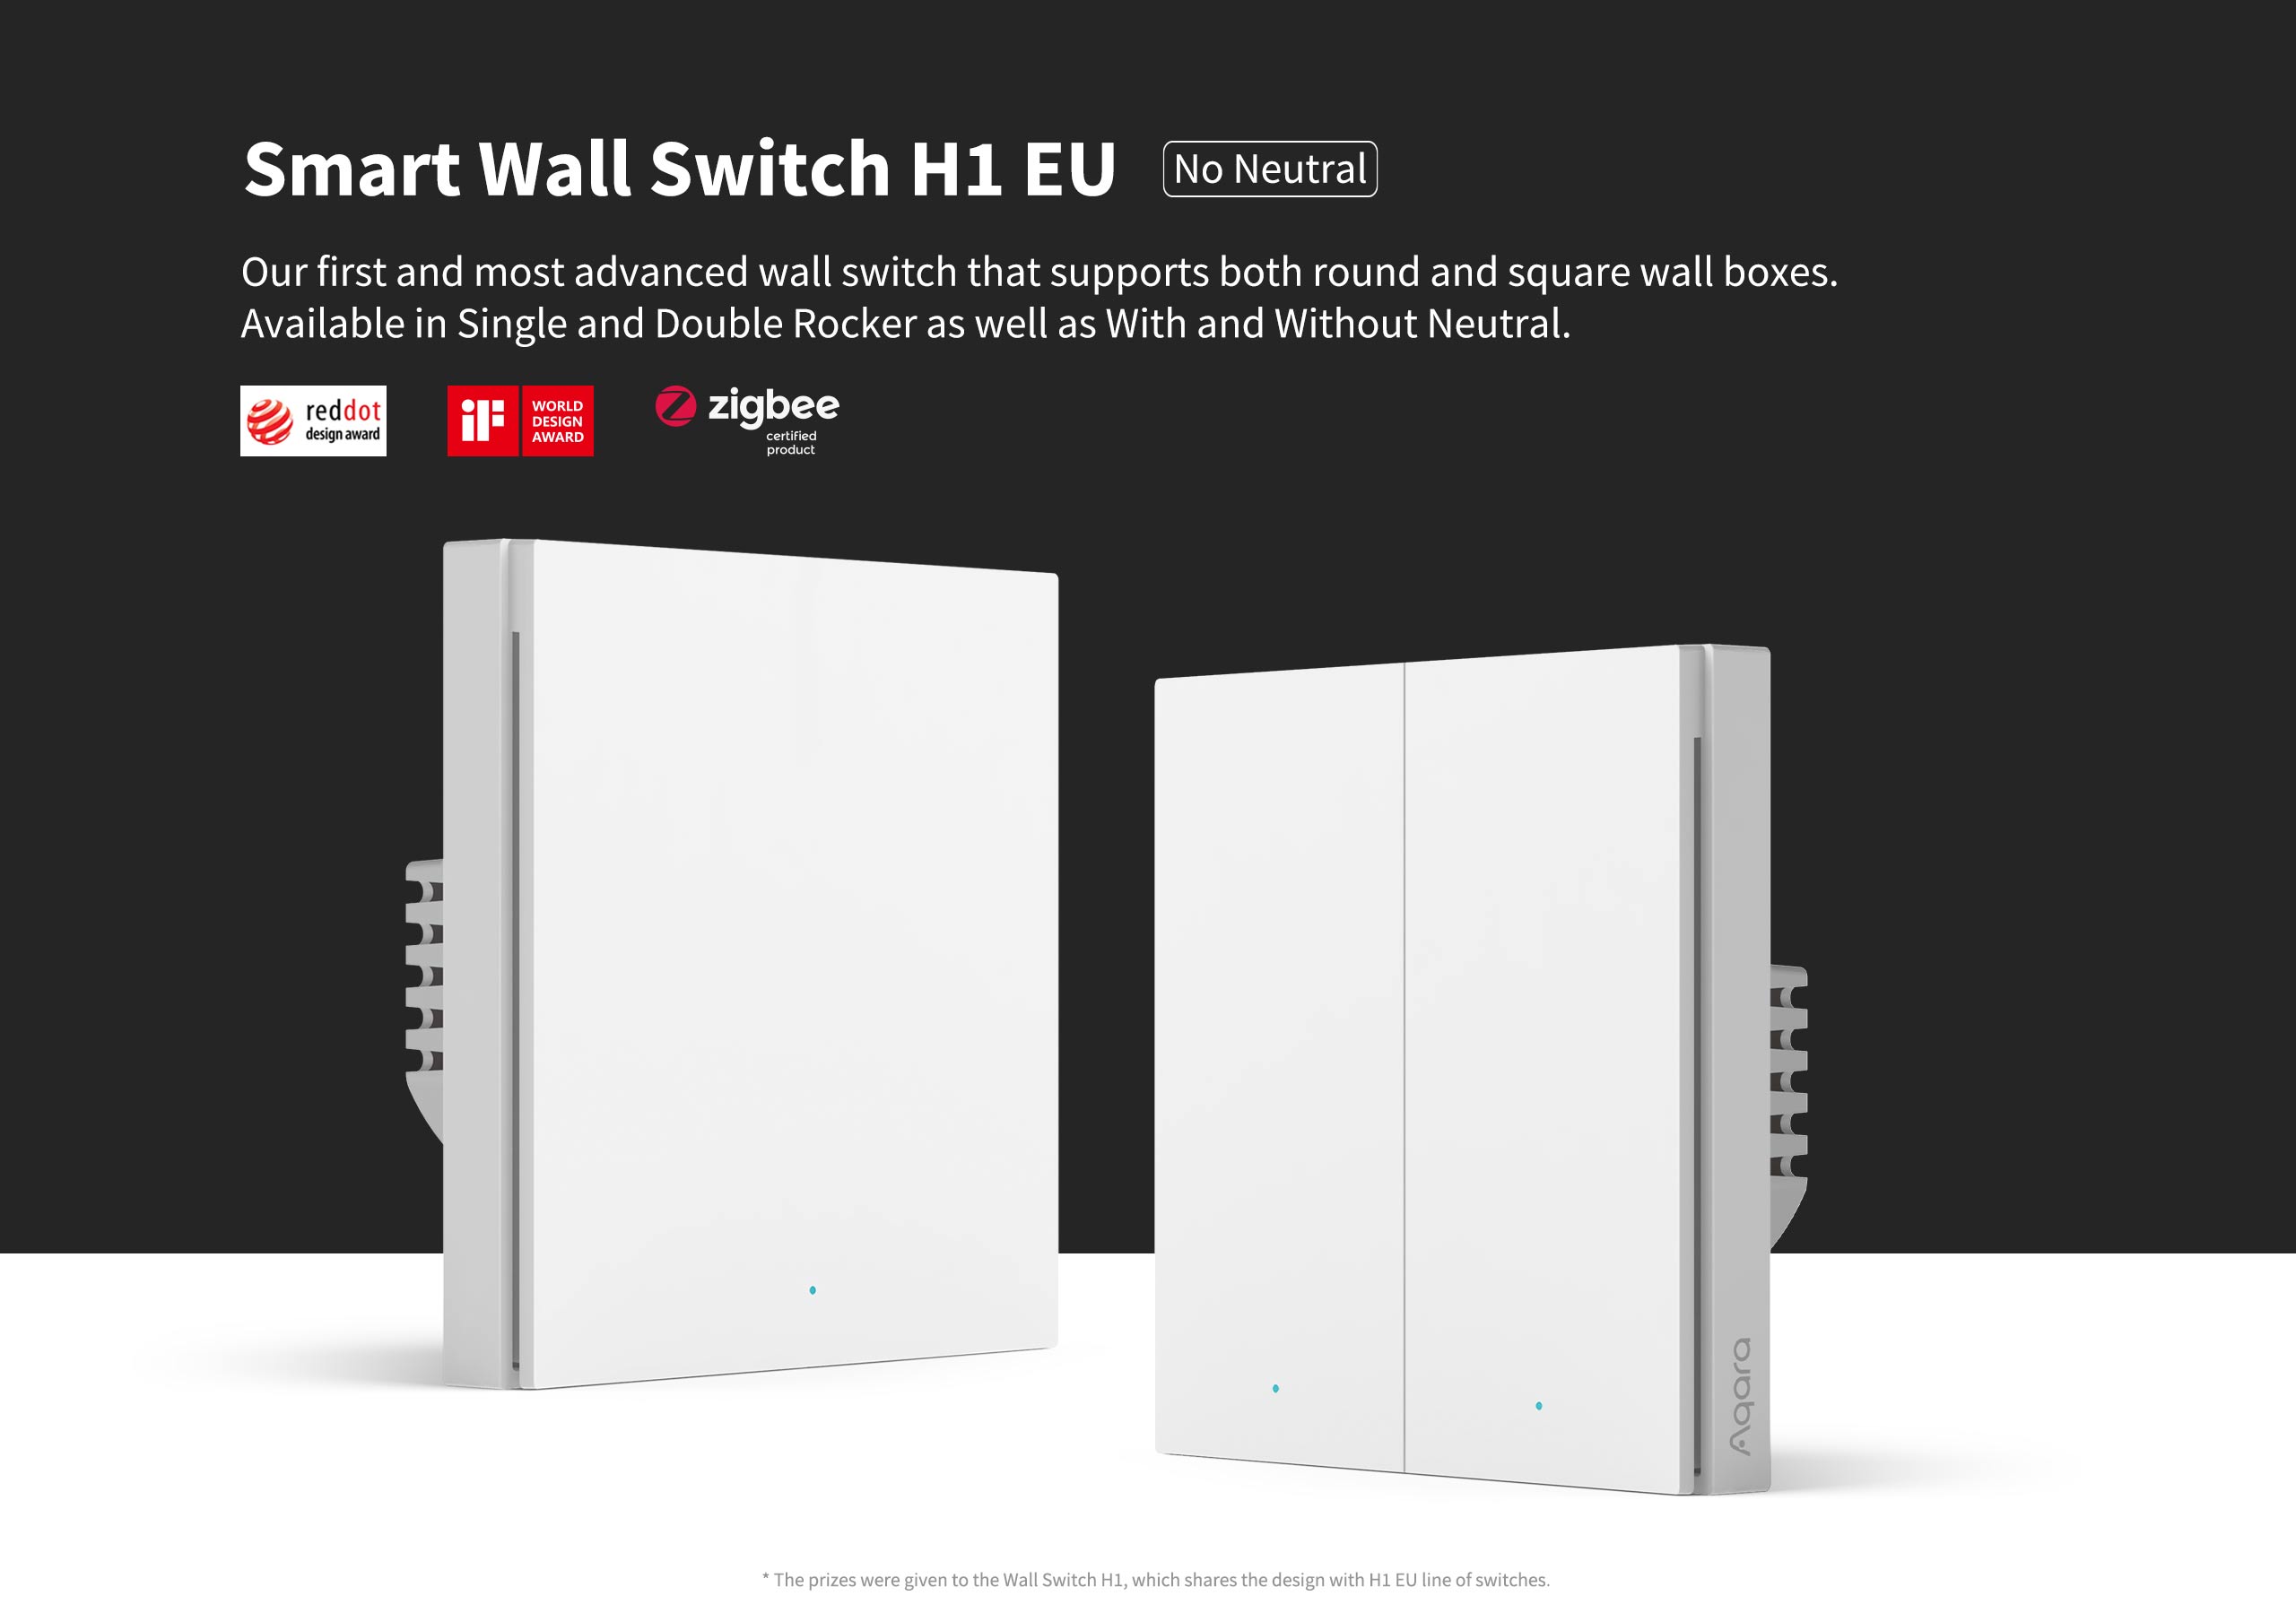 Smart Wall Switch H1 No Neutral pc 01 Aqara Smart Light Switch, Single Wall Switch that Functions as a Regular Light Switch as well as being Smart